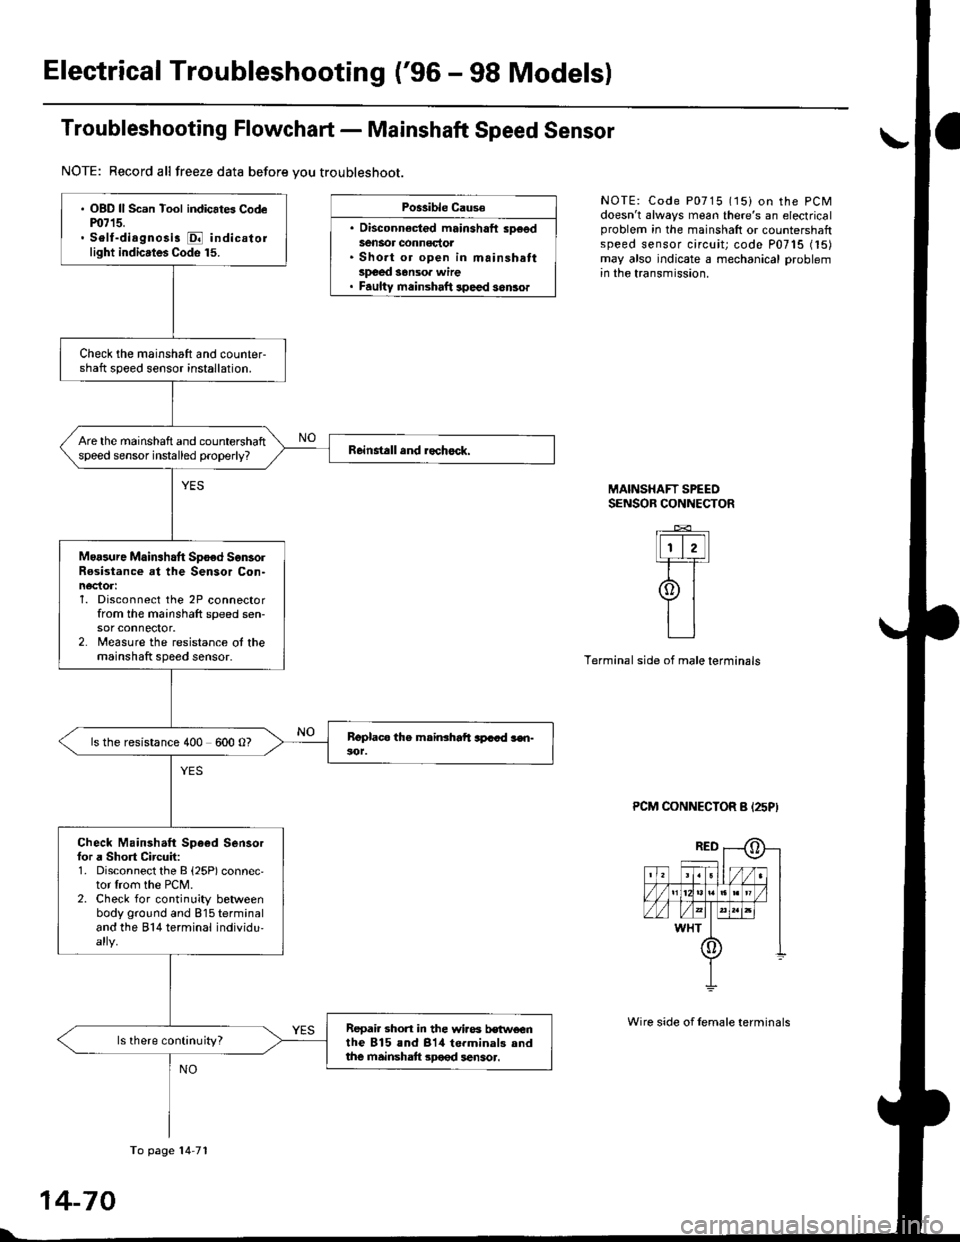 HONDA CIVIC 1998 6.G User Guide Electrical Troubleshooting (96 - 98 Modelsl
Troubleshooting Flowchart - Mainshaft Speed Sensor
NOTE: Record all freeze data before you troubleshoot.
Po$ible Cause
. Disconnect€d mainshaft sD€edSe